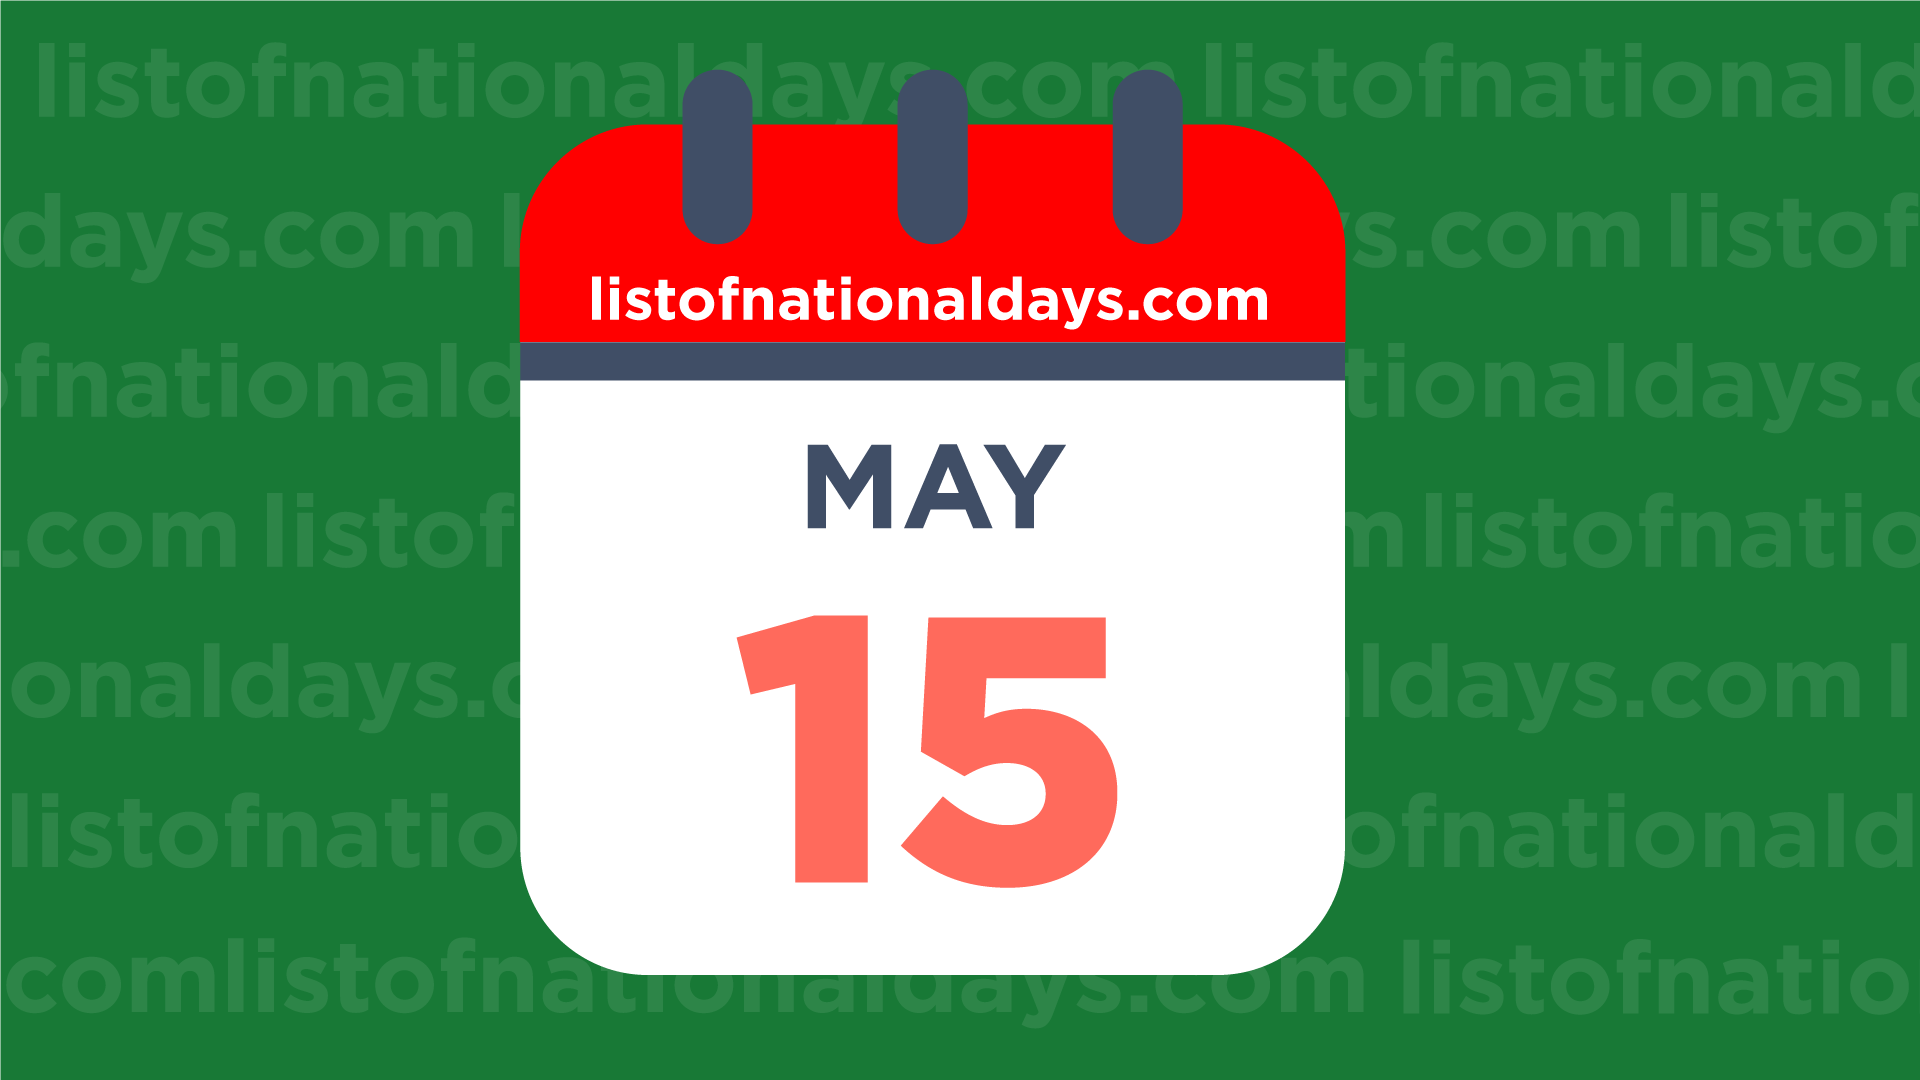 MAY 15TH National Holidays, Observances & Famous Birthdays